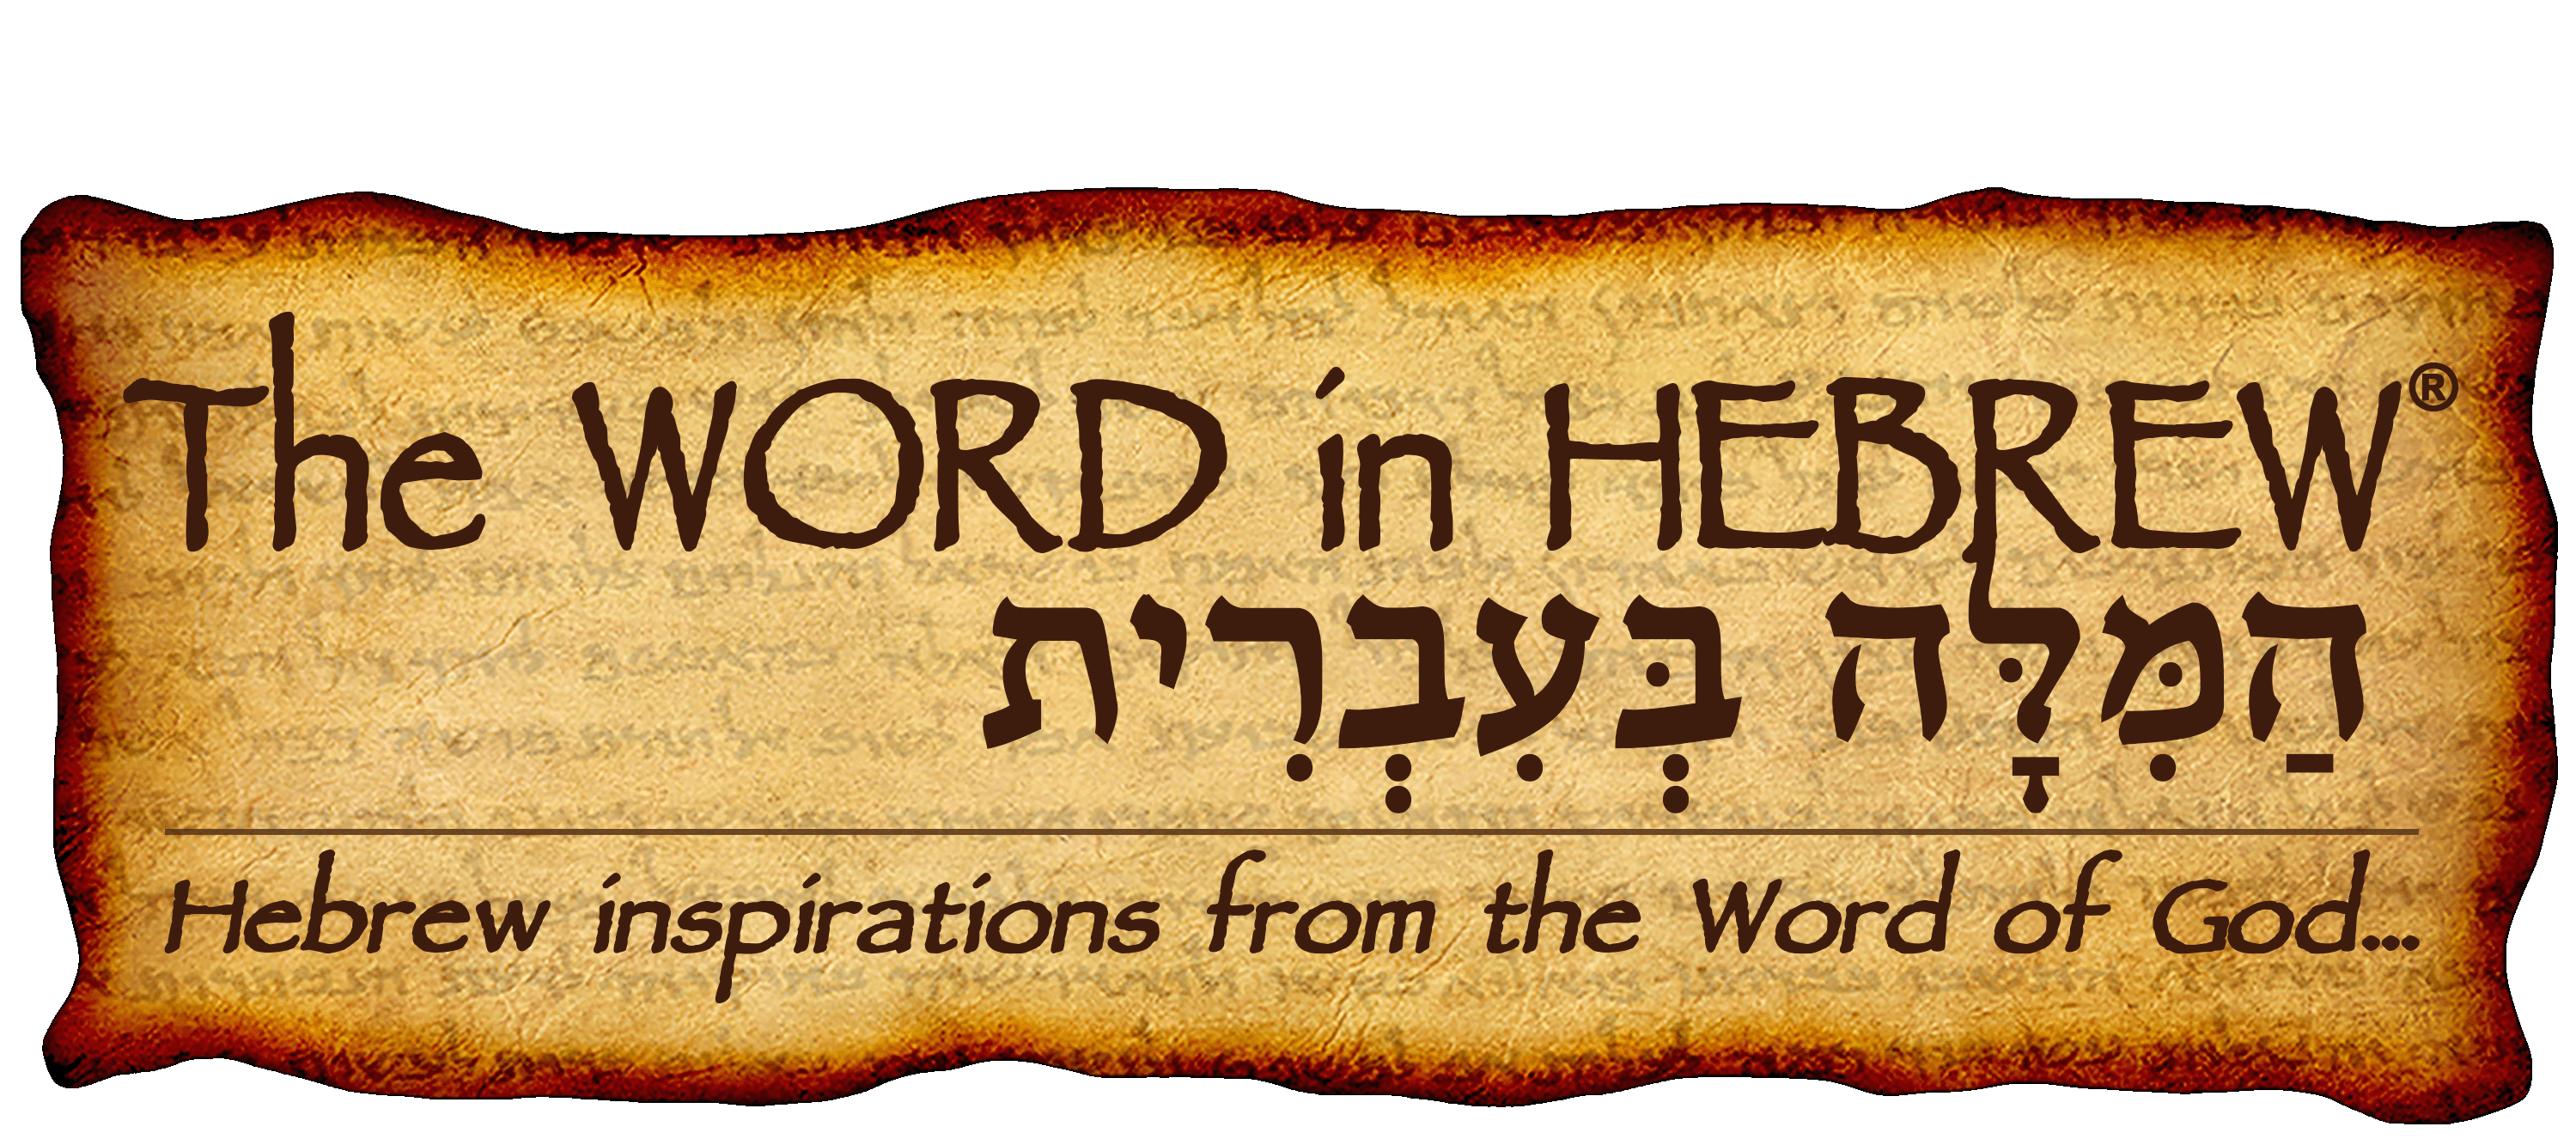 The WORD in HEBREW | Hebrew inspirations from the Word of God...